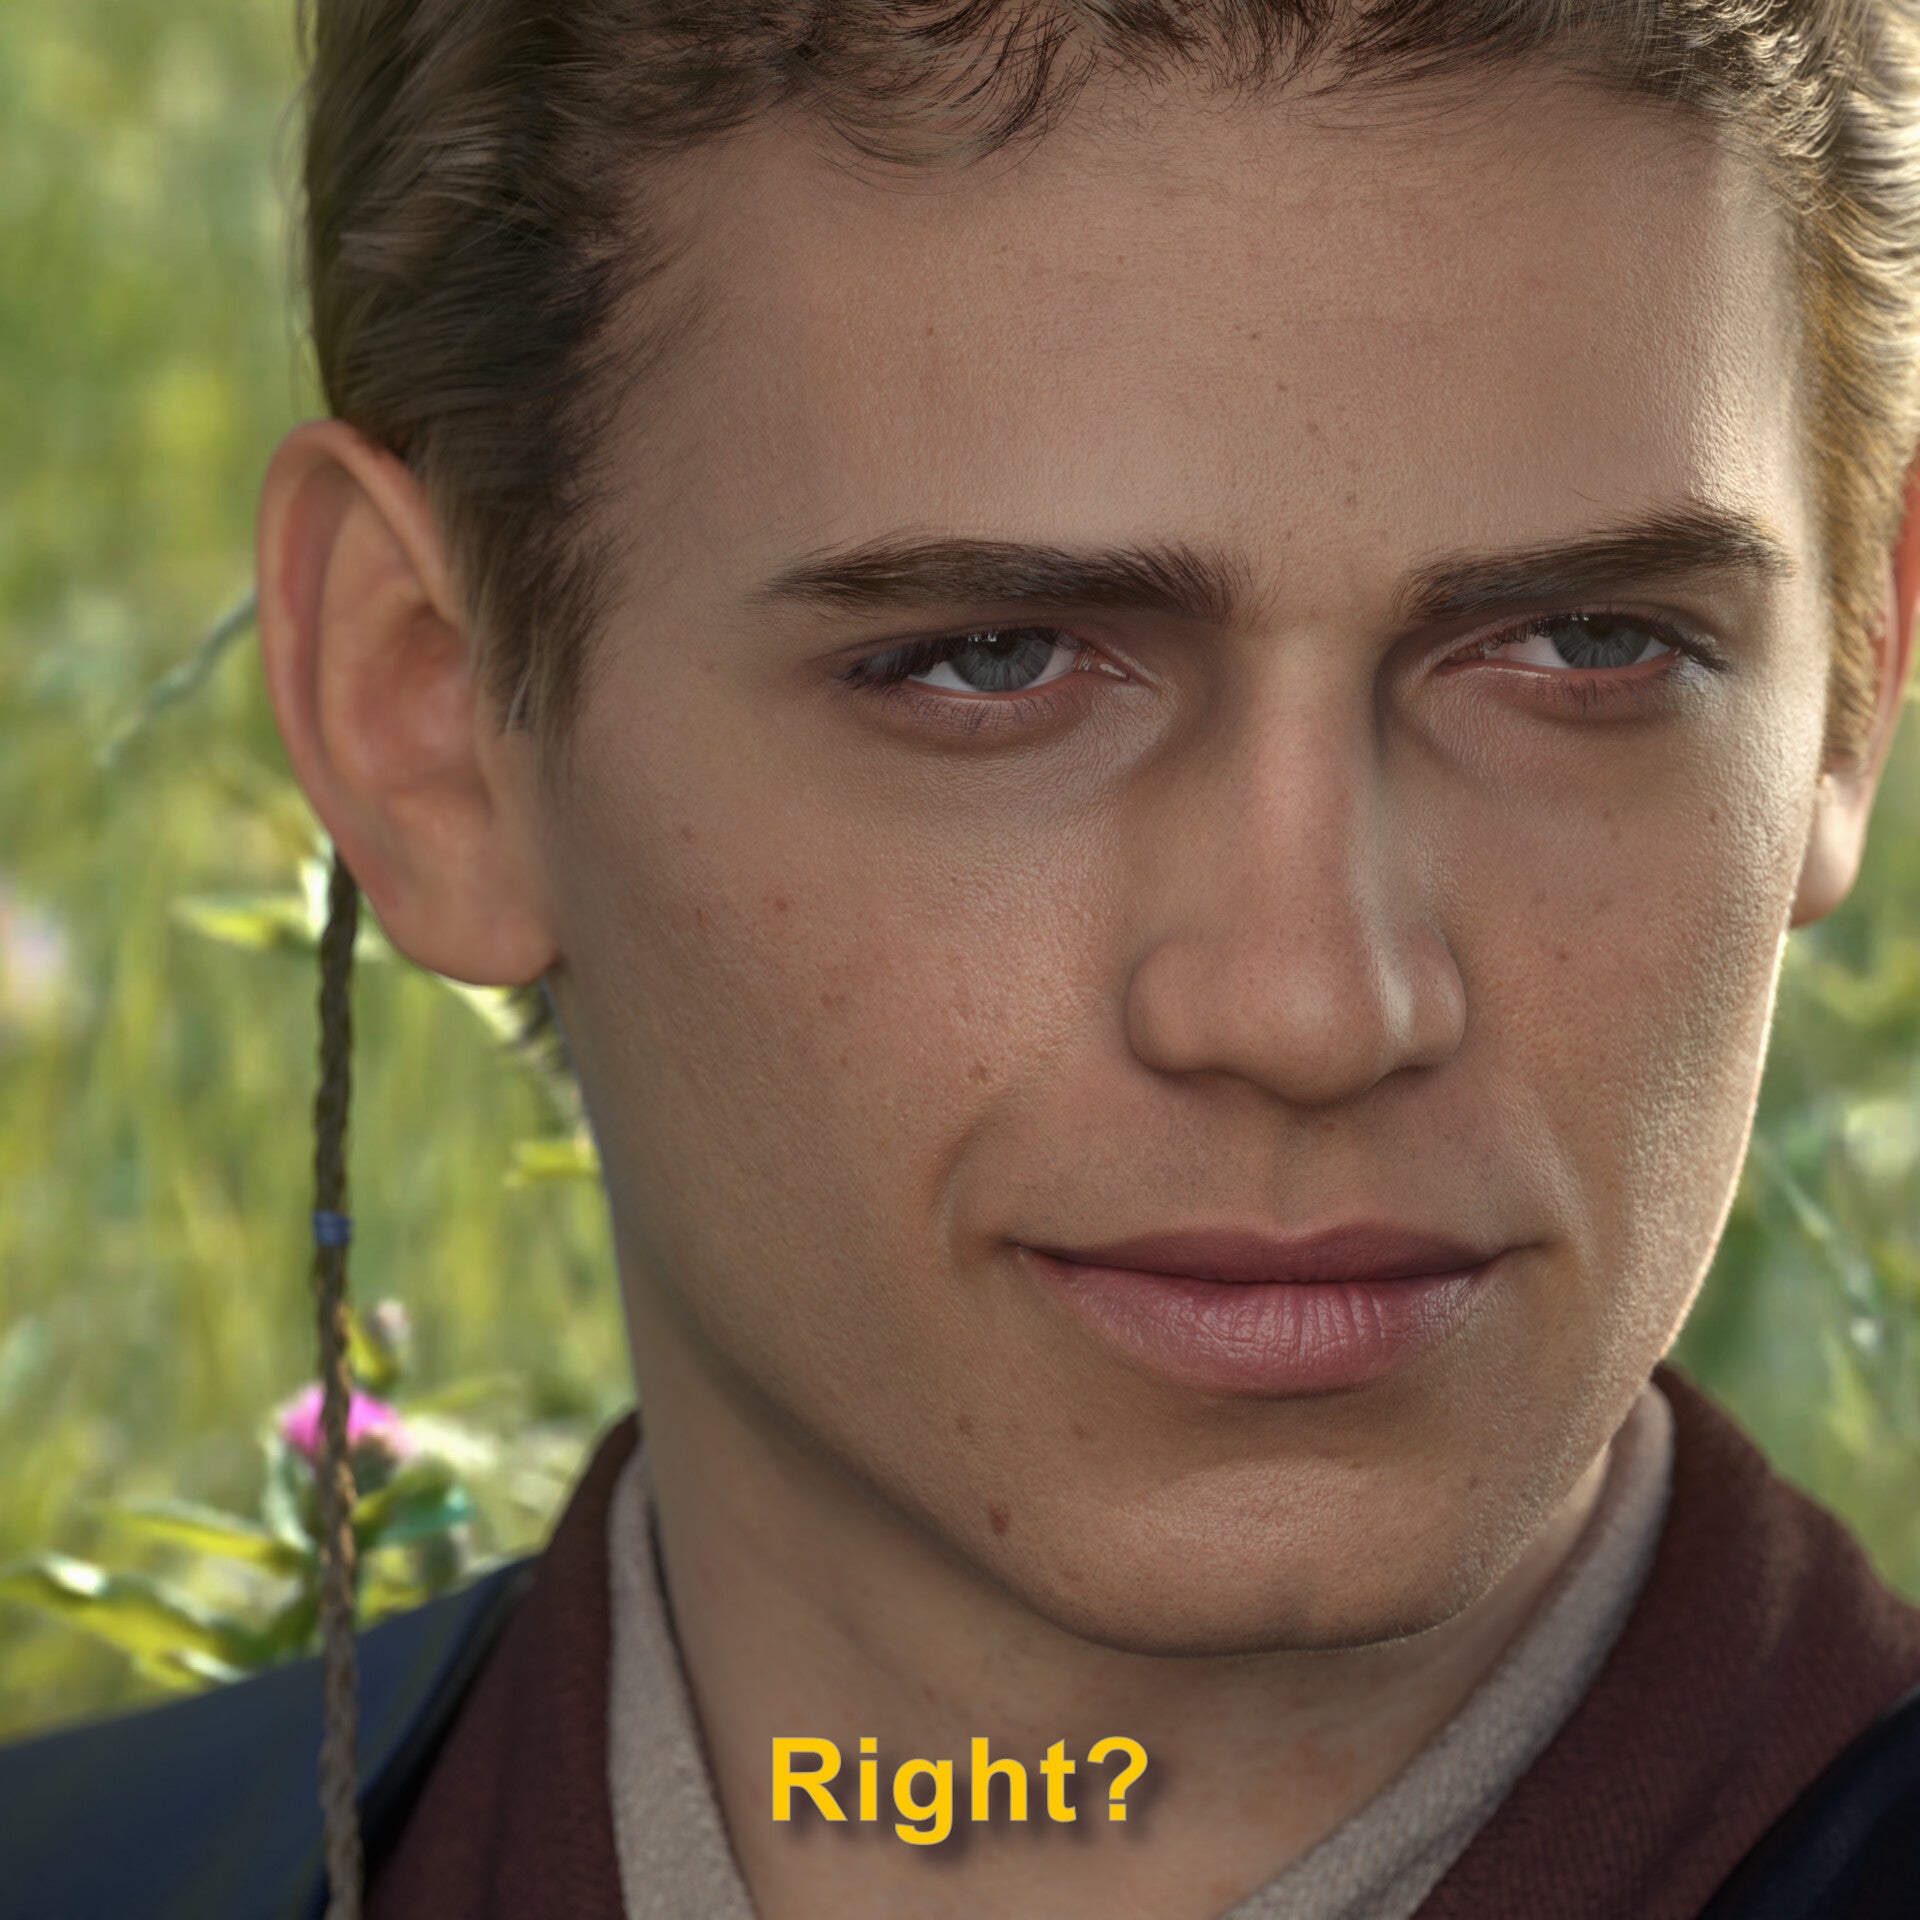 The Anakin Meme Looks Better In 3D, Right? Right?